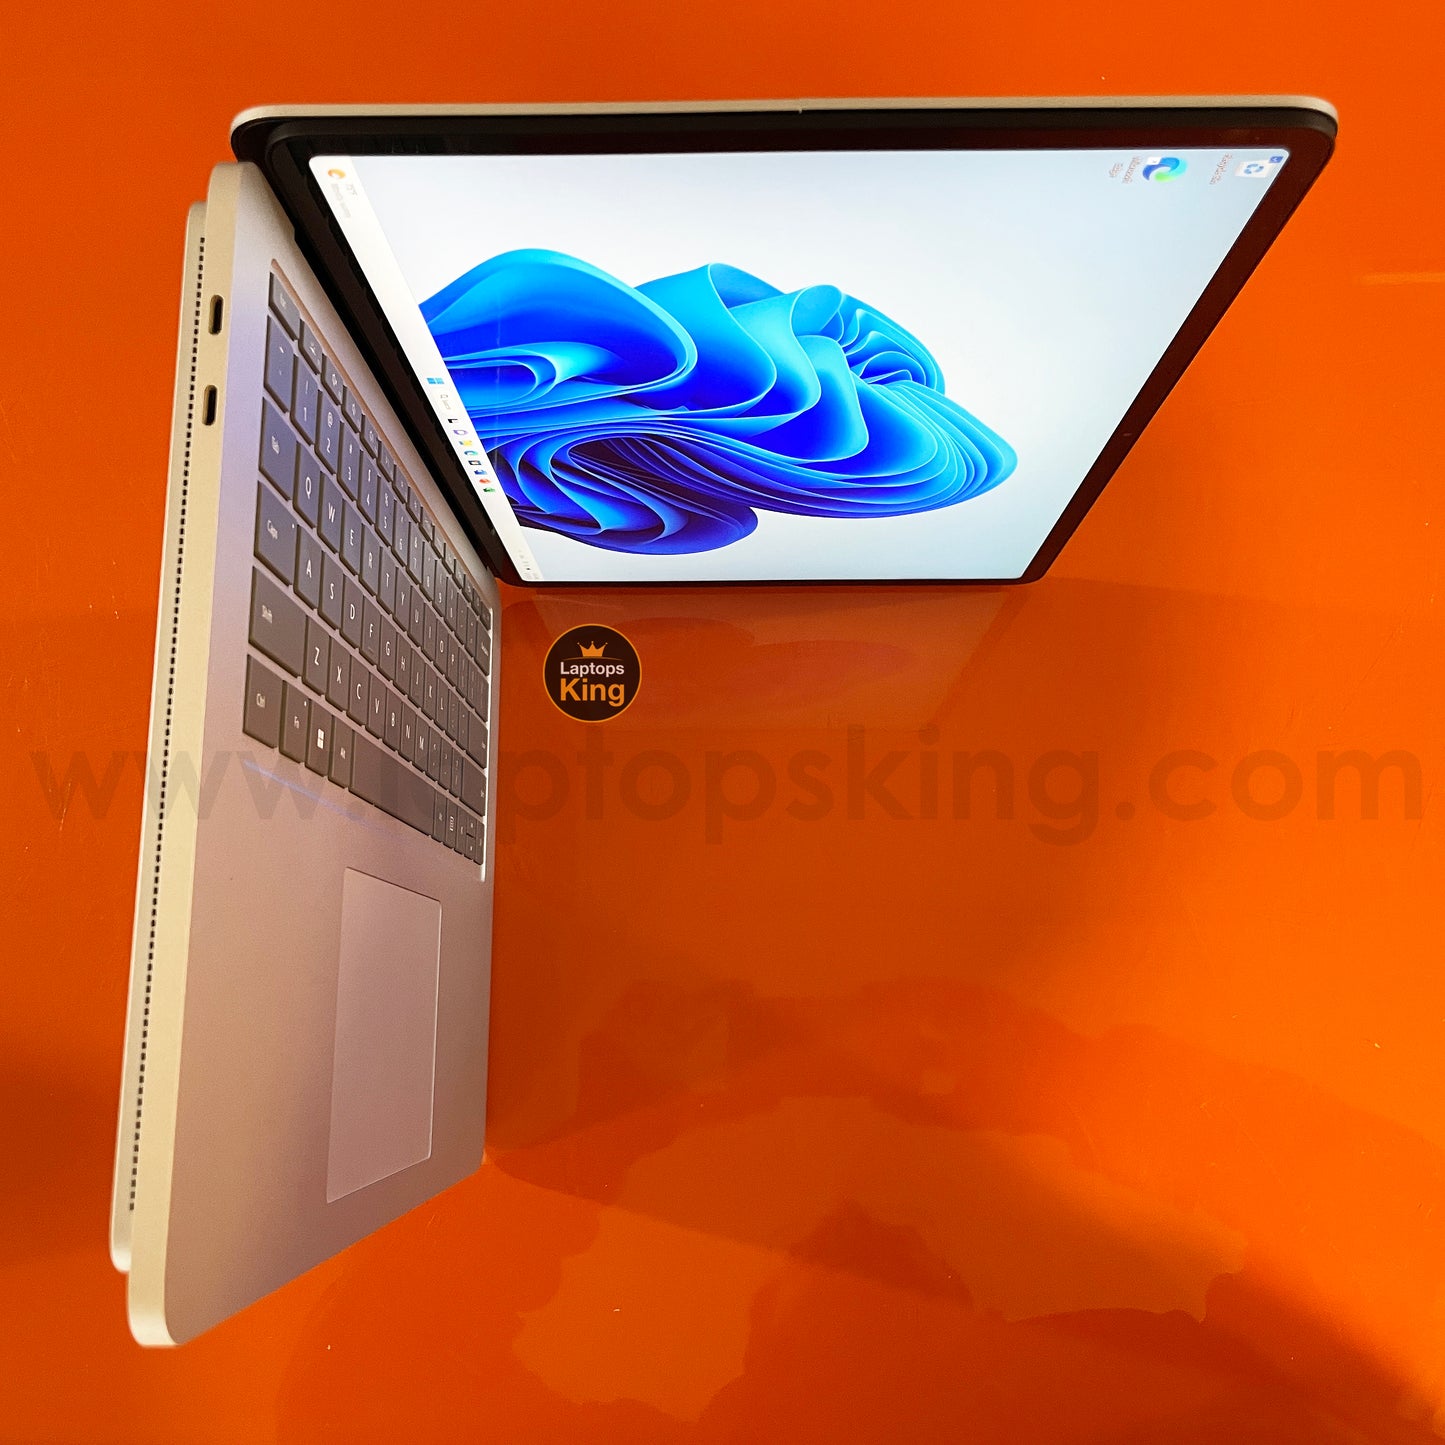 Microsoft Surface Studio i7-11370h Rtx 3050 Ti 120hz Res. 2400x1600 Touch 2in1 Laptop (Brand New) Gaming laptop, Graphic Design laptop, best laptop for gaming, best laptop for graphic design, computer for sale Lebanon, laptop for video editing in Lebanon, laptop for sale Lebanon, best graphic design laptop,	best video editing laptop, best programming laptop, laptop for sale in Lebanon, laptops for sale in Lebanon, laptop for sale in Lebanon, buy computer Lebanon, buy laptop Lebanon.